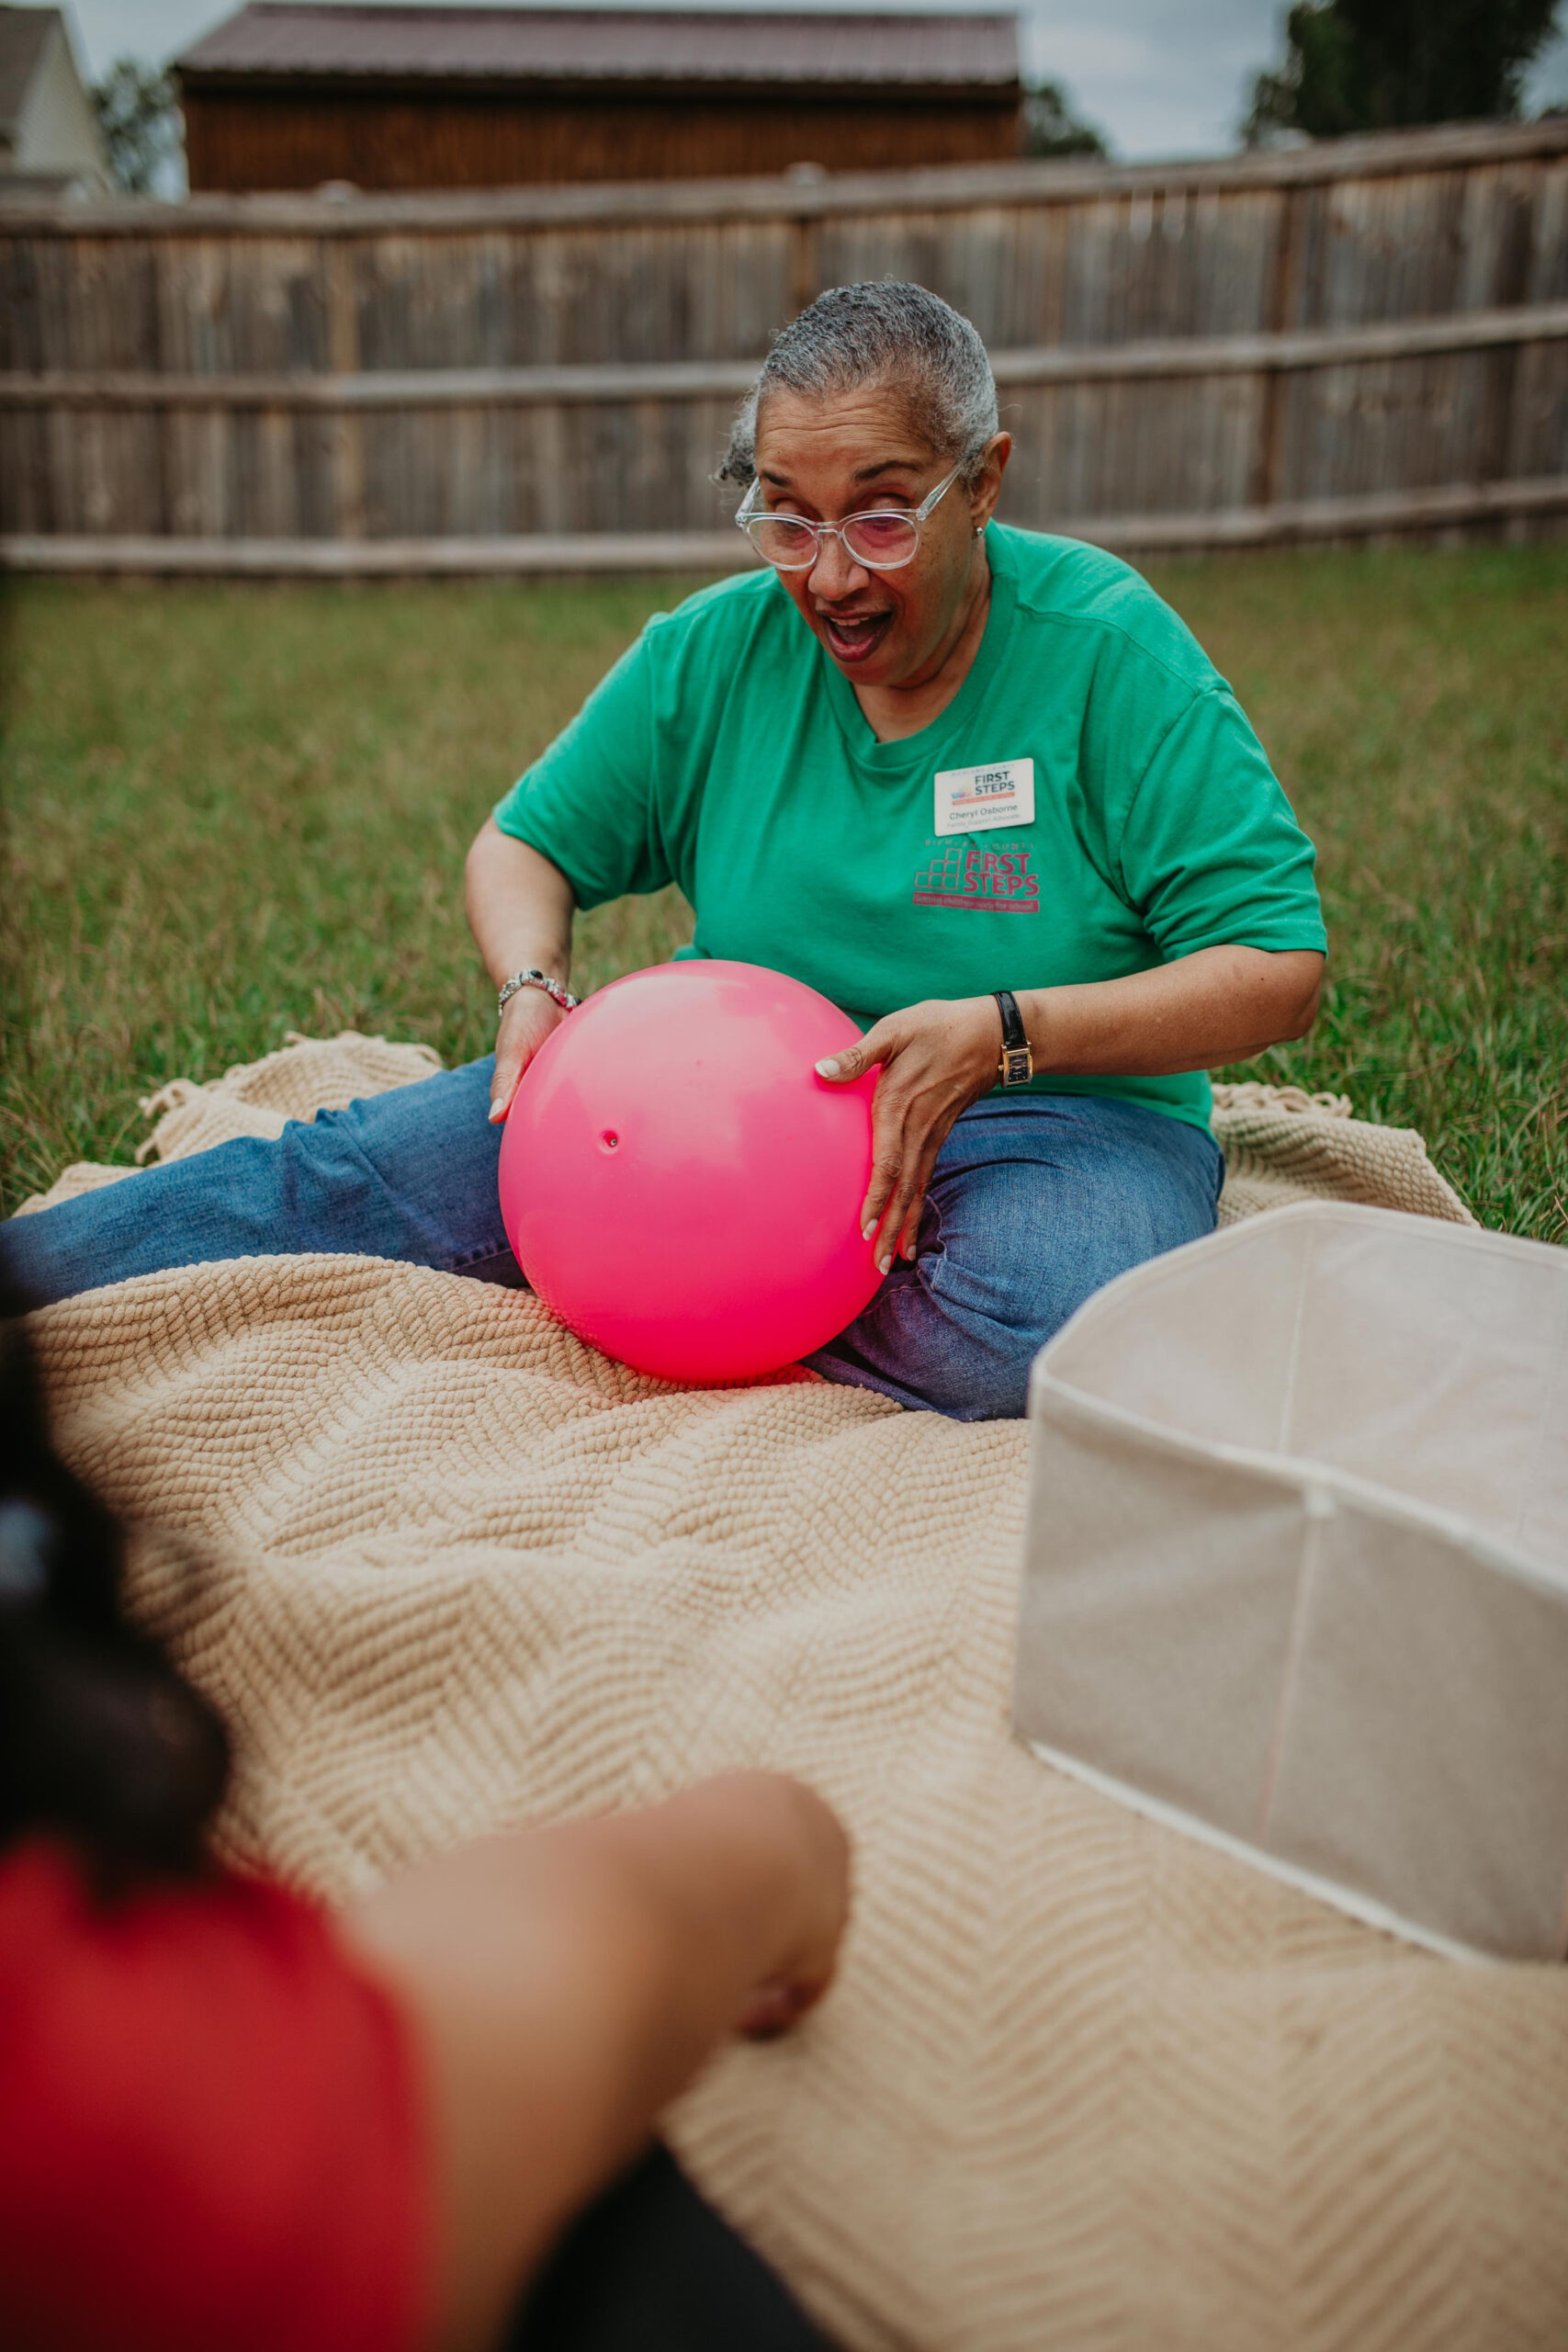 caretake with a large pink ball playing with kids